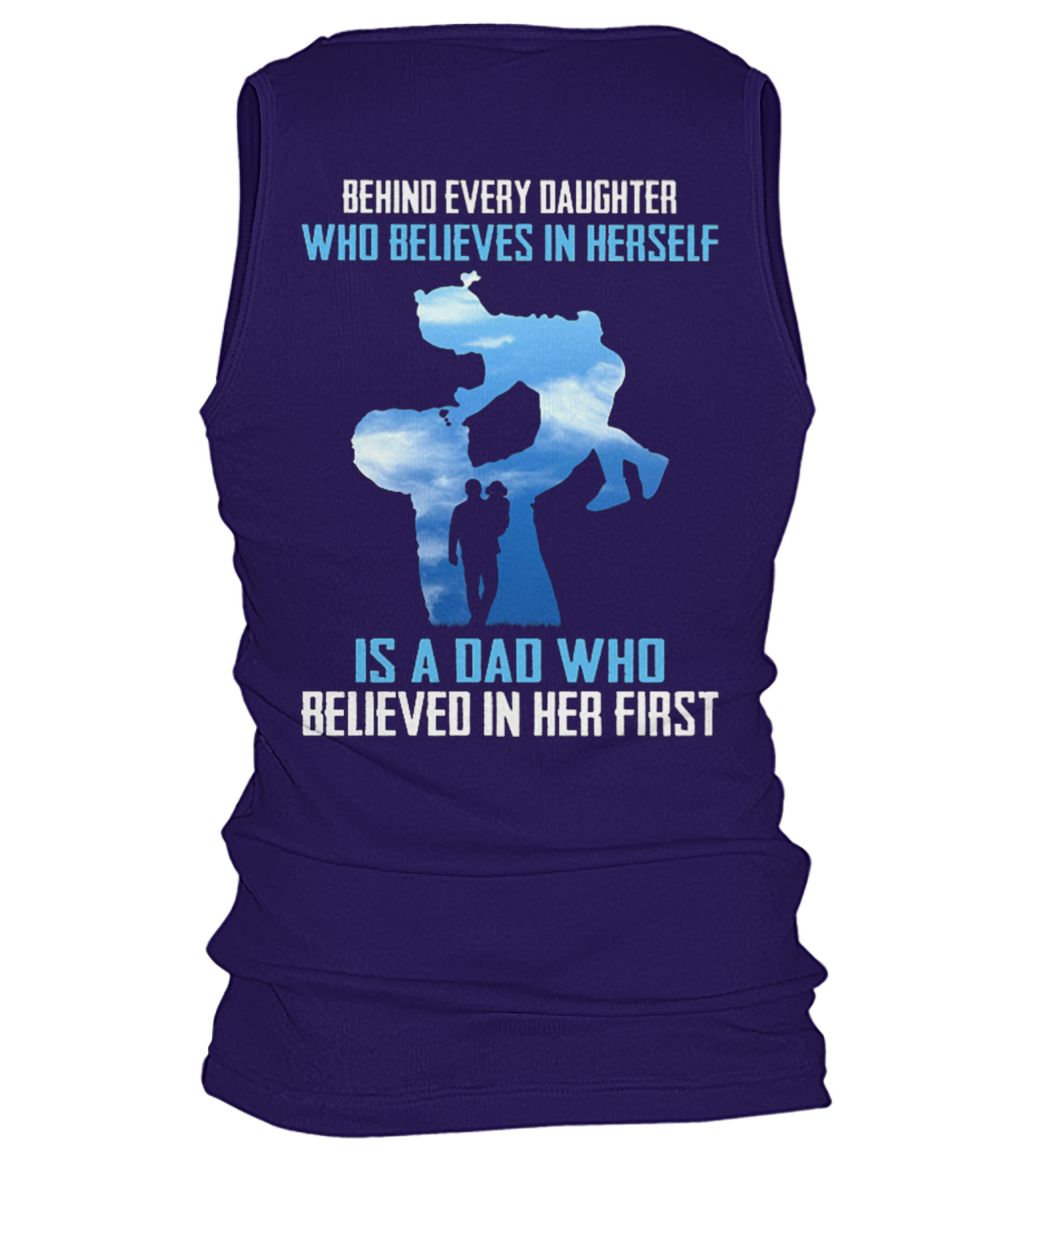 Behind every daughter who believes in herself is a dad who believed in her first men's tank top